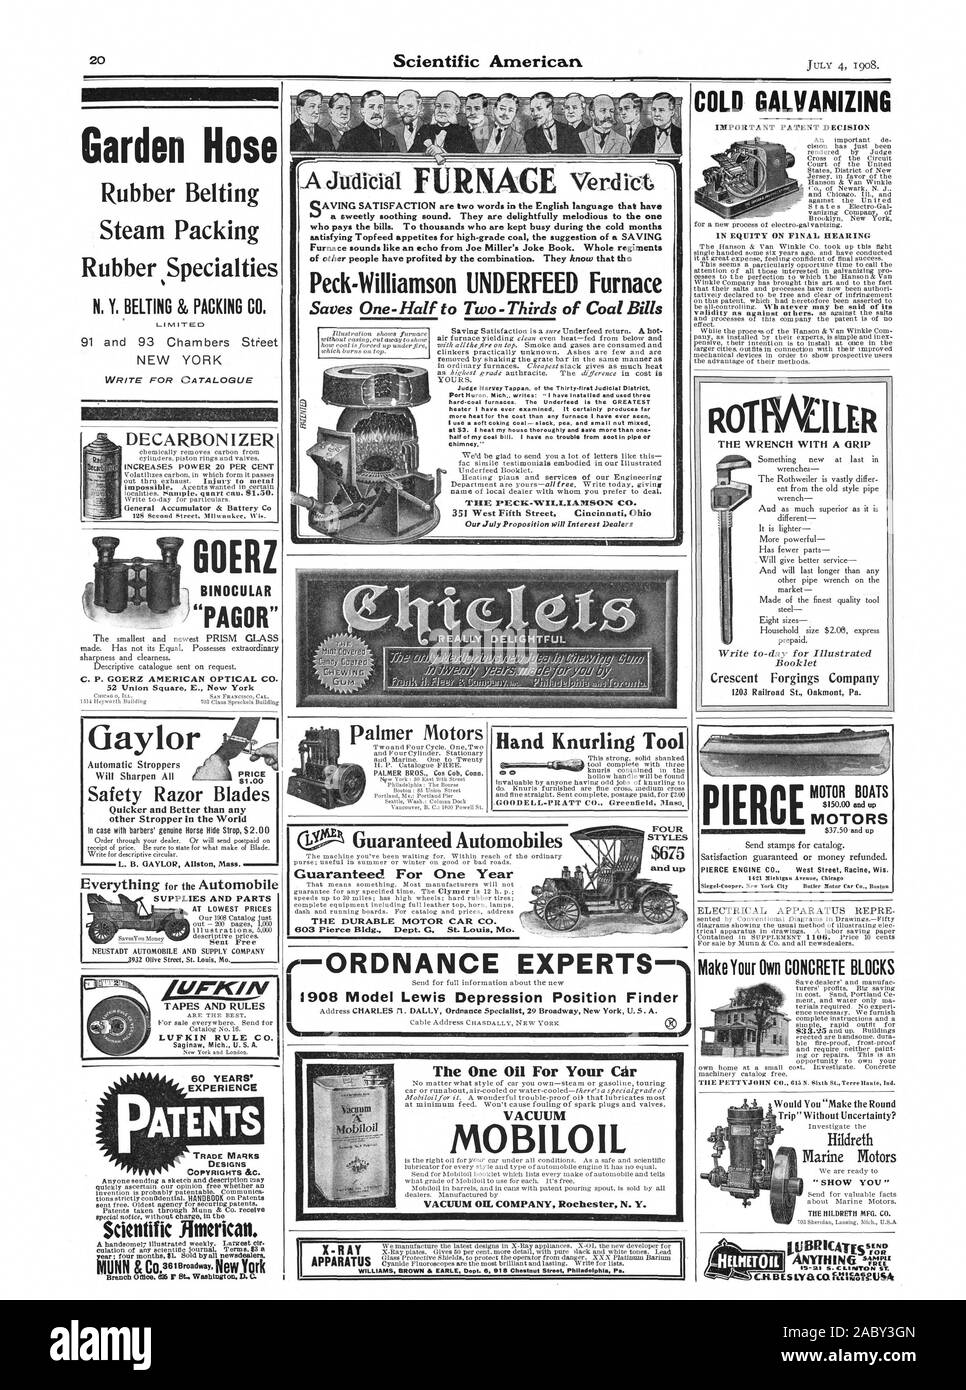 PIER MOTOR BOATS MOTORS $37.50 and up 1421 Michigan Avenue Chicag almer Motors VACUUM MOBILOIL Guaranteed For One Year THE DURABLE MOTOR CAR CO. 603 Pierce Bldg. Dept. G St. Louis Mo. FOUR STYLES $675 and up Hand Knurling Tool GOODELL-PRATT CO. Greenfield Mass Make Your Own CONCRETE BLOCKS 'SHOW YOU' SEND FOR ANYTHING. nticir ItiBRICAns, scientific american, 1908-07-04 Stock Photo